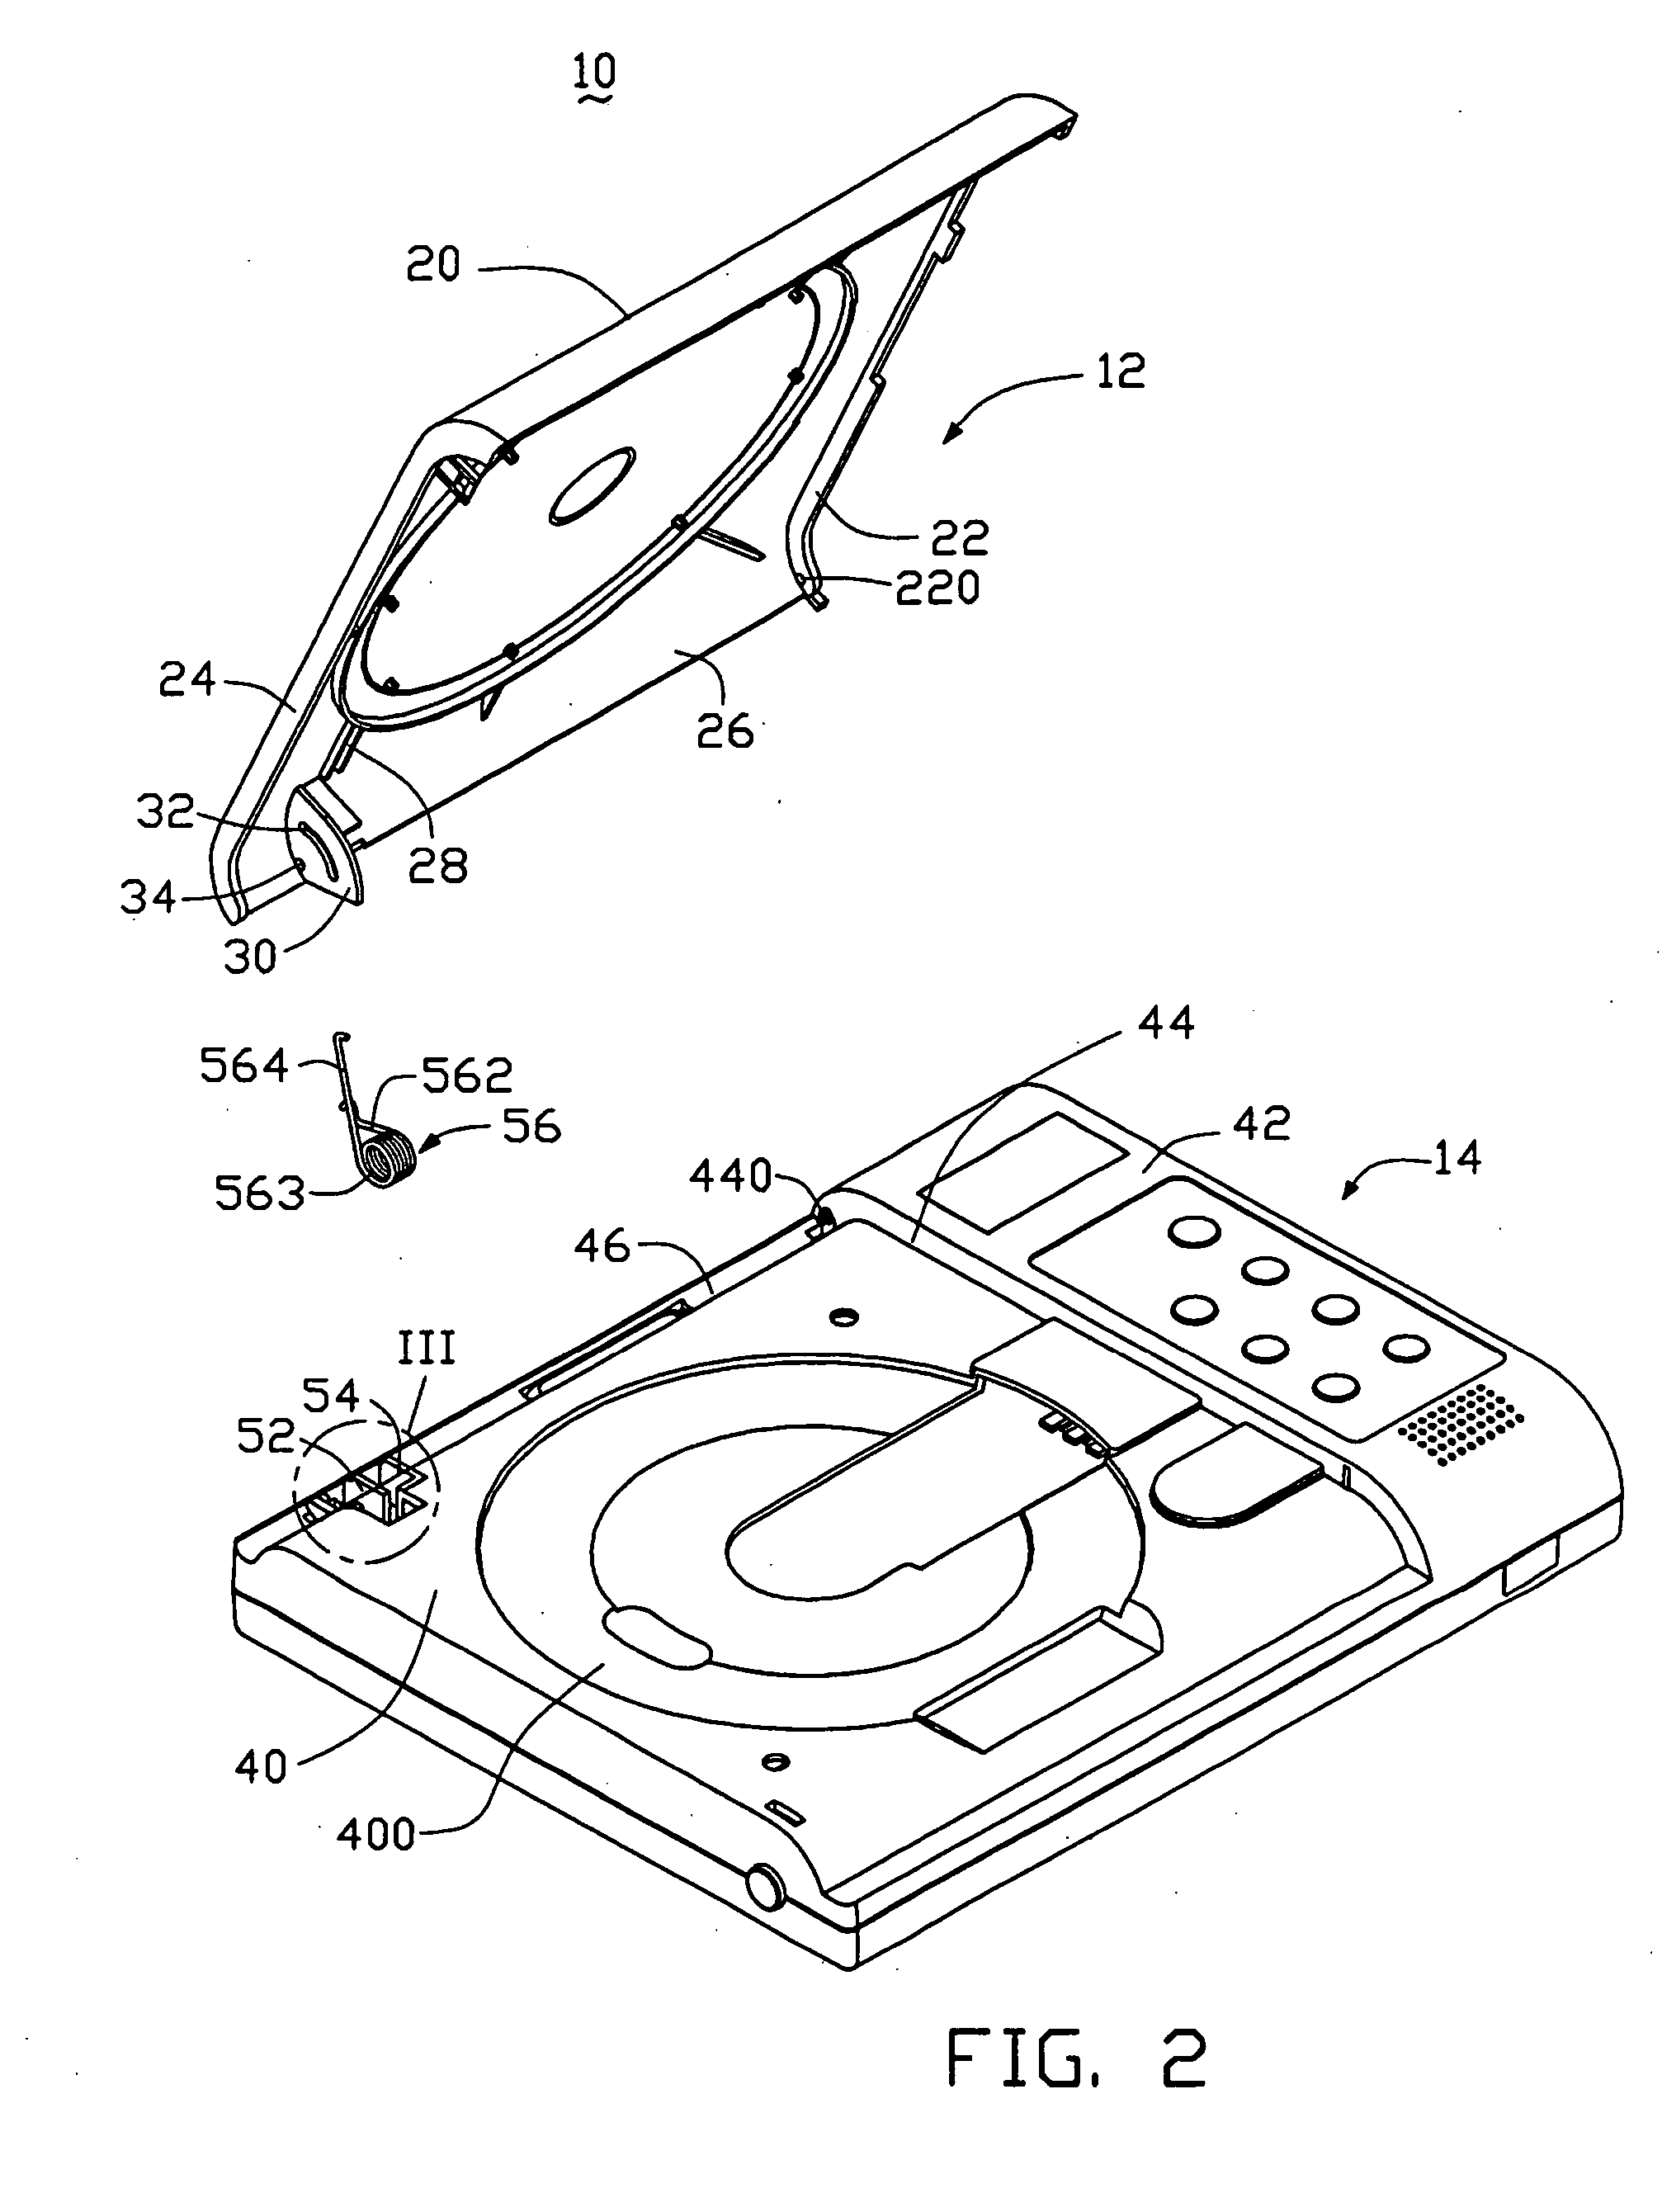 Casing for optical disk player